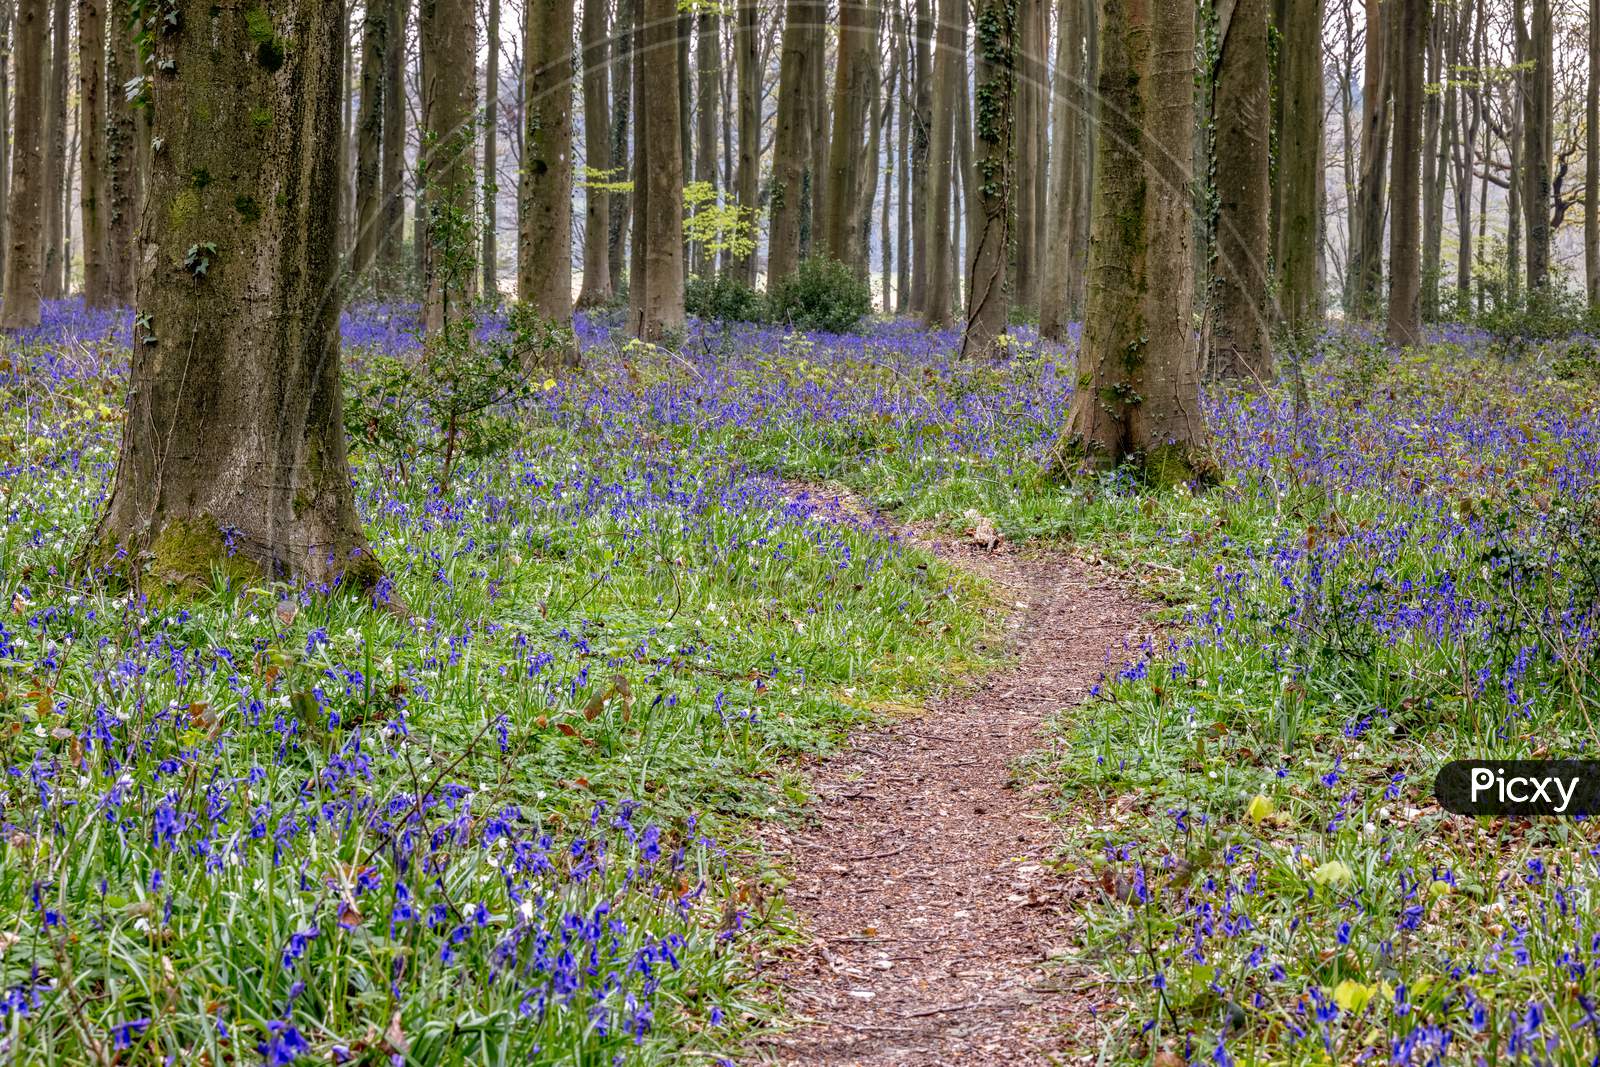 View Of The Bluebells Emerging In Wepham Wood